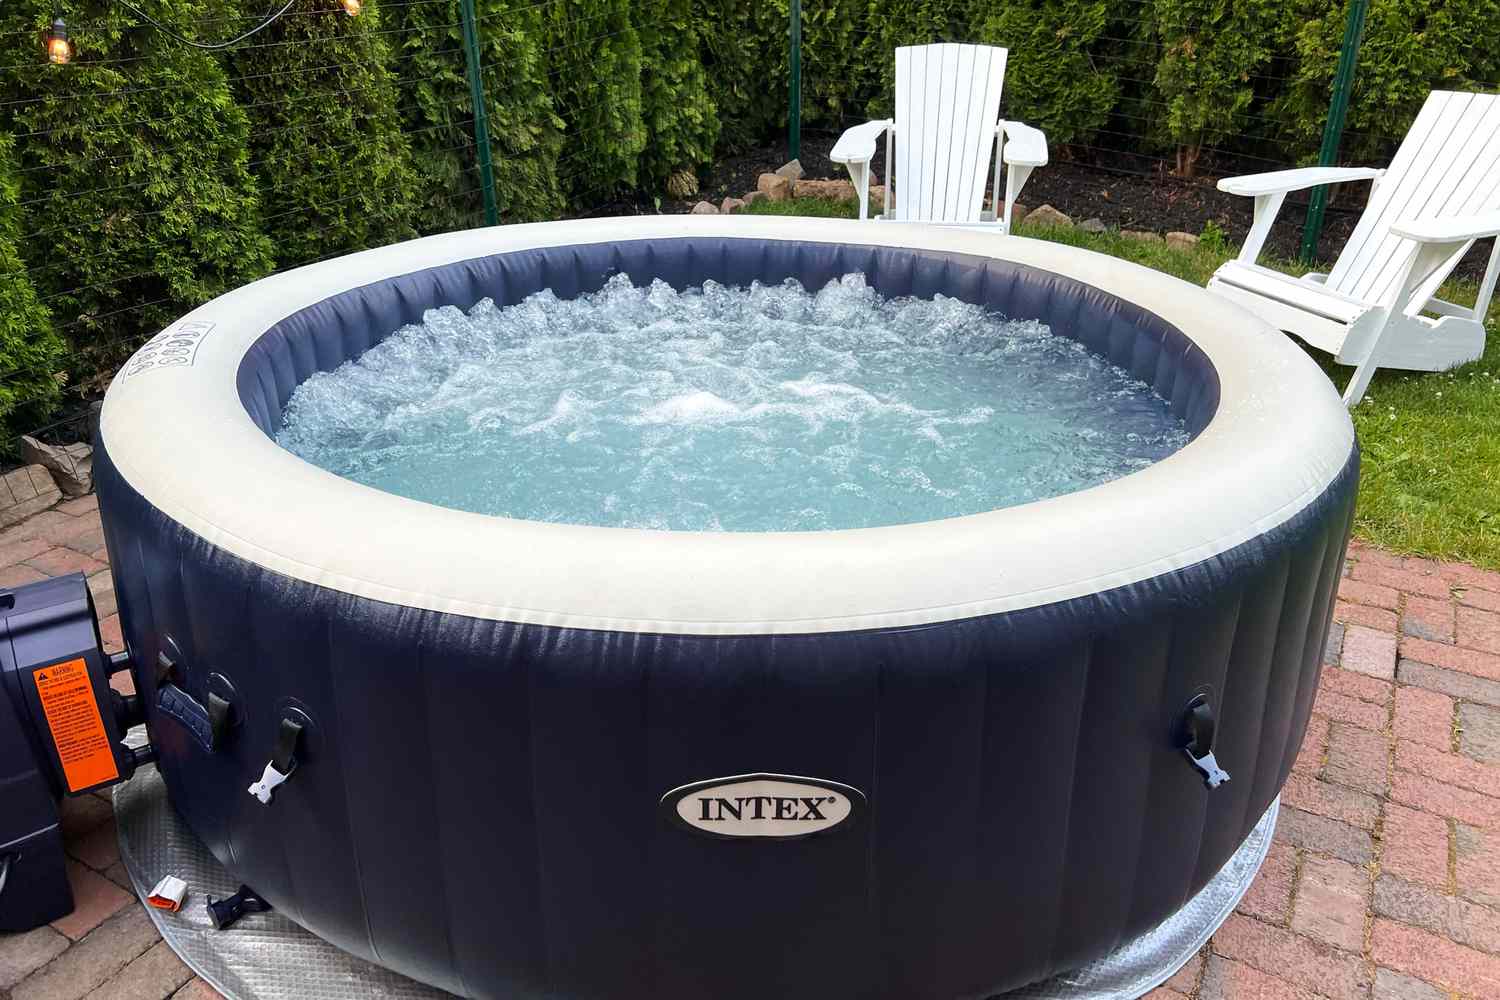 Why Does My Hot Tub Lose Water